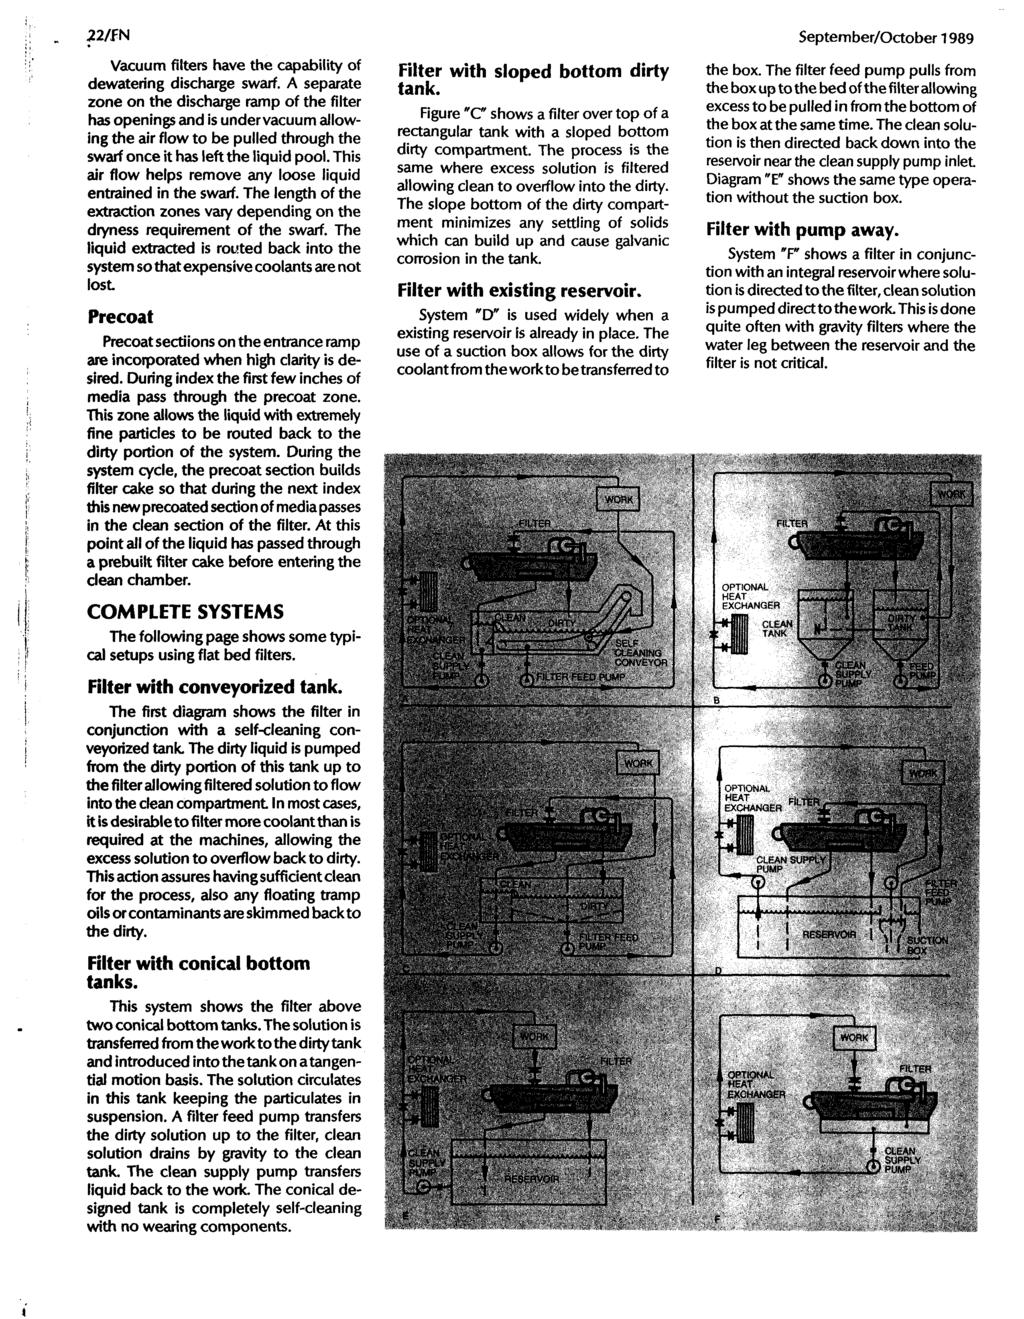 fz/fn September/October 1989 Vacuum filters have the capability of dewatering discharge swarf.